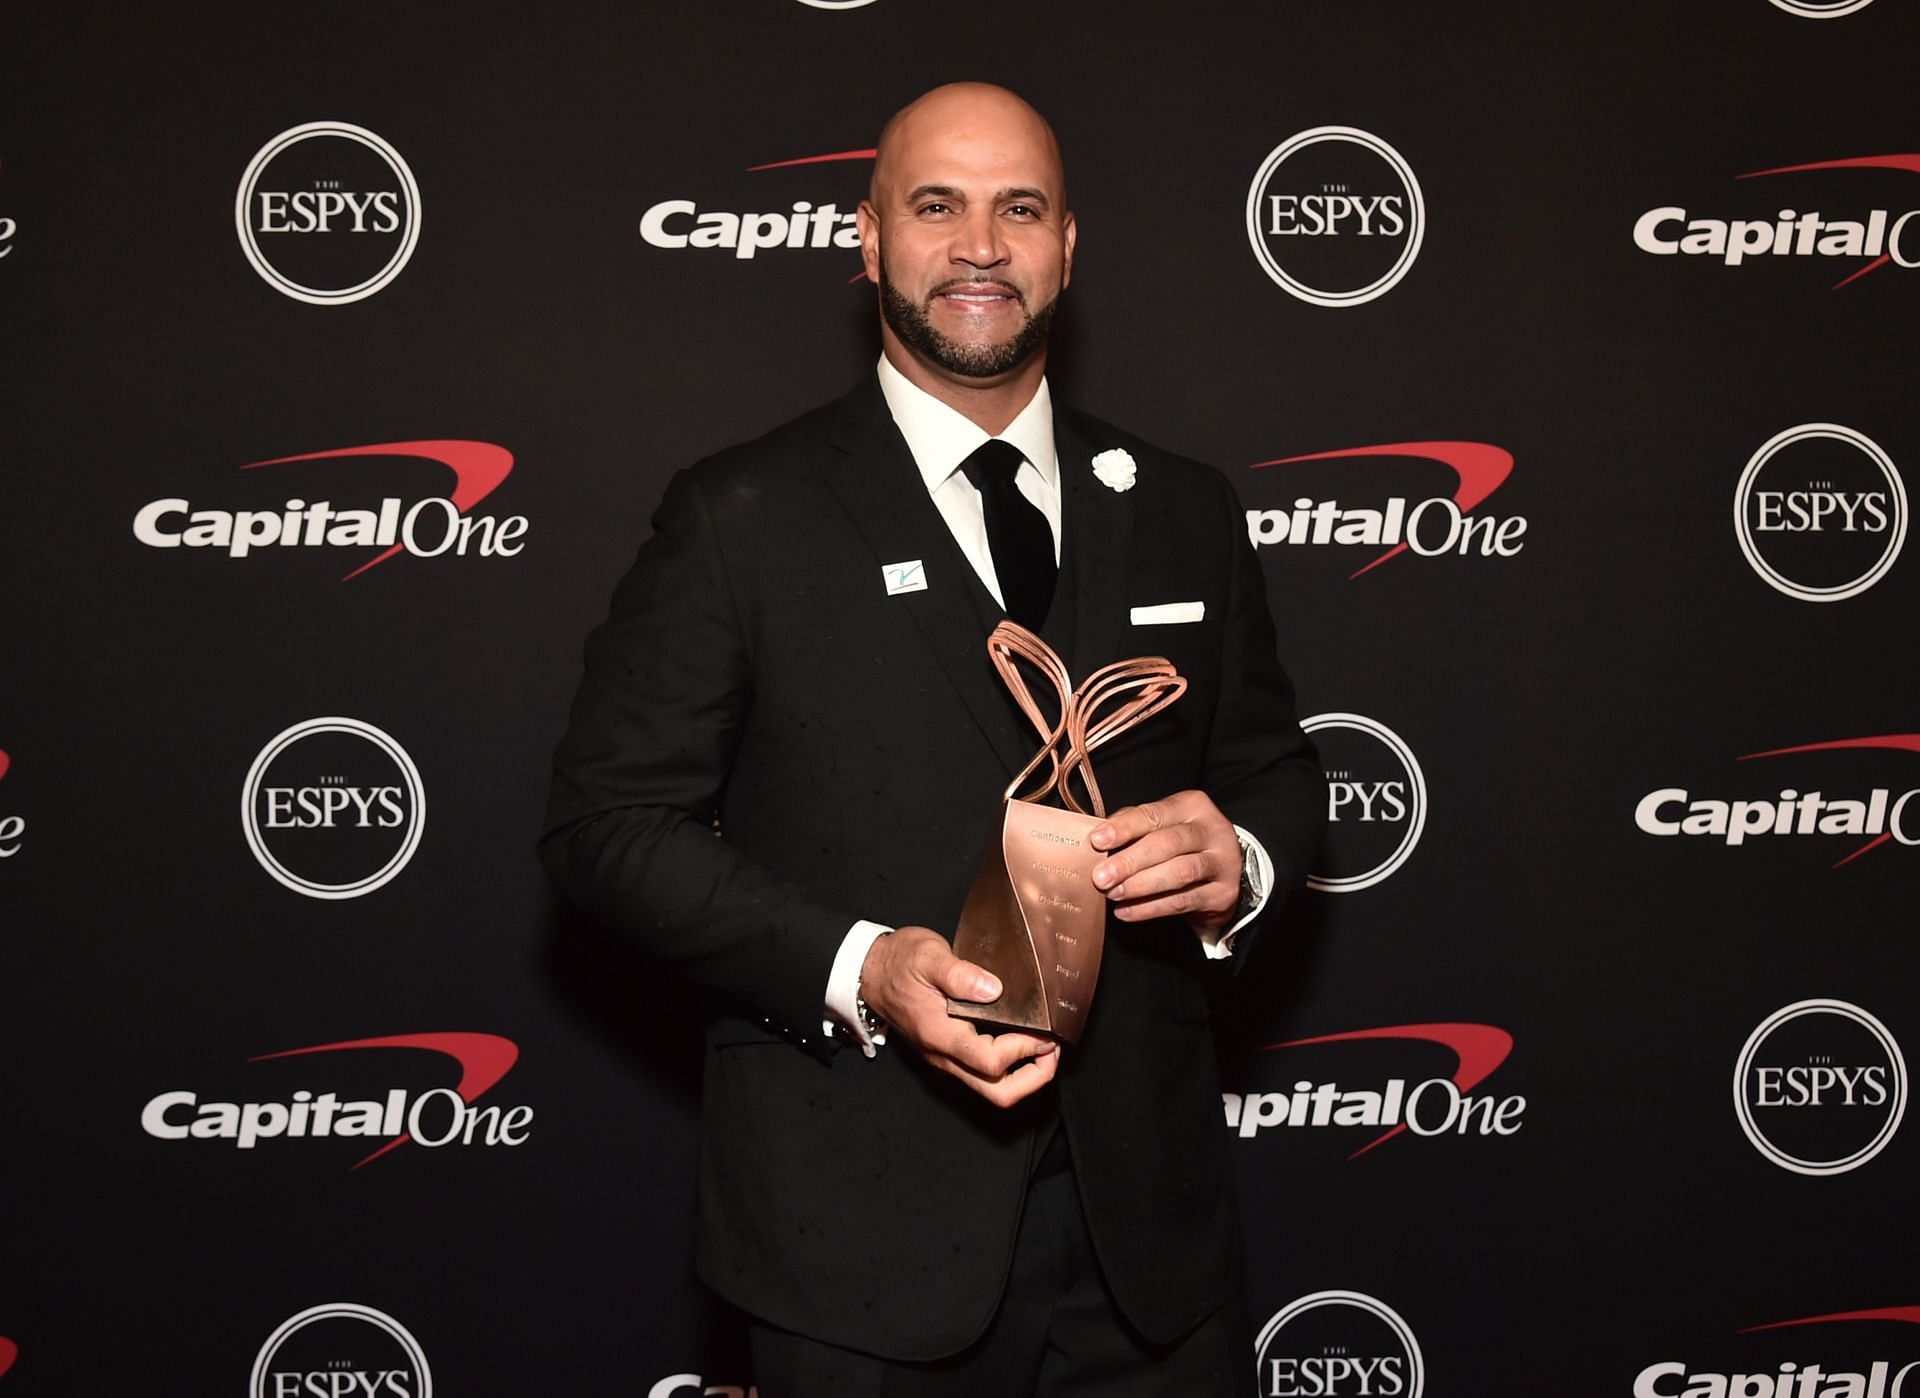 2022 ESPYs - Backstage: HOLLYWOOD, CALIFORNIA - JULY 20: Albert Pujols attends the 2022 ESPYs at Dolby Theatre on July 20, 2022 in Hollywood, California. (Photo by Alberto E. Rodriguez/Getty Images)